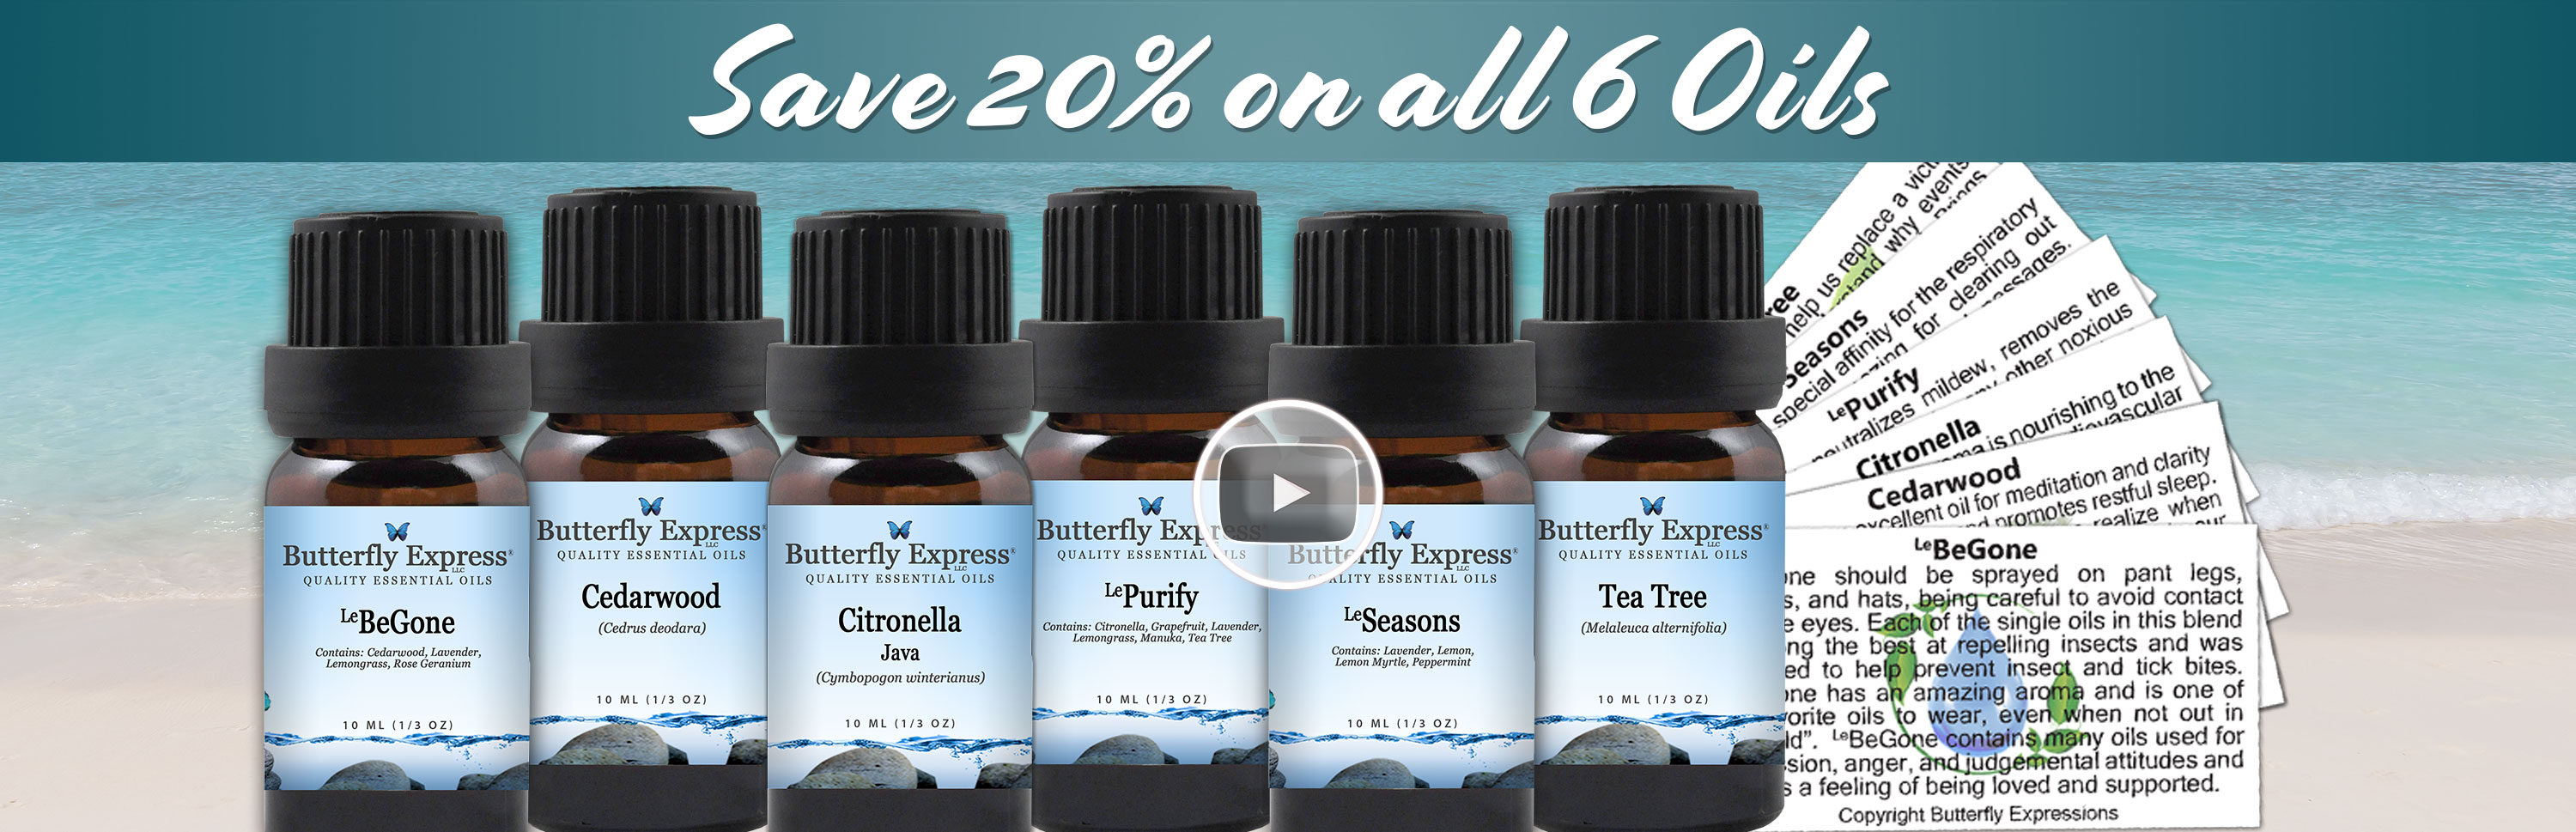 6 Oil Monthly Special